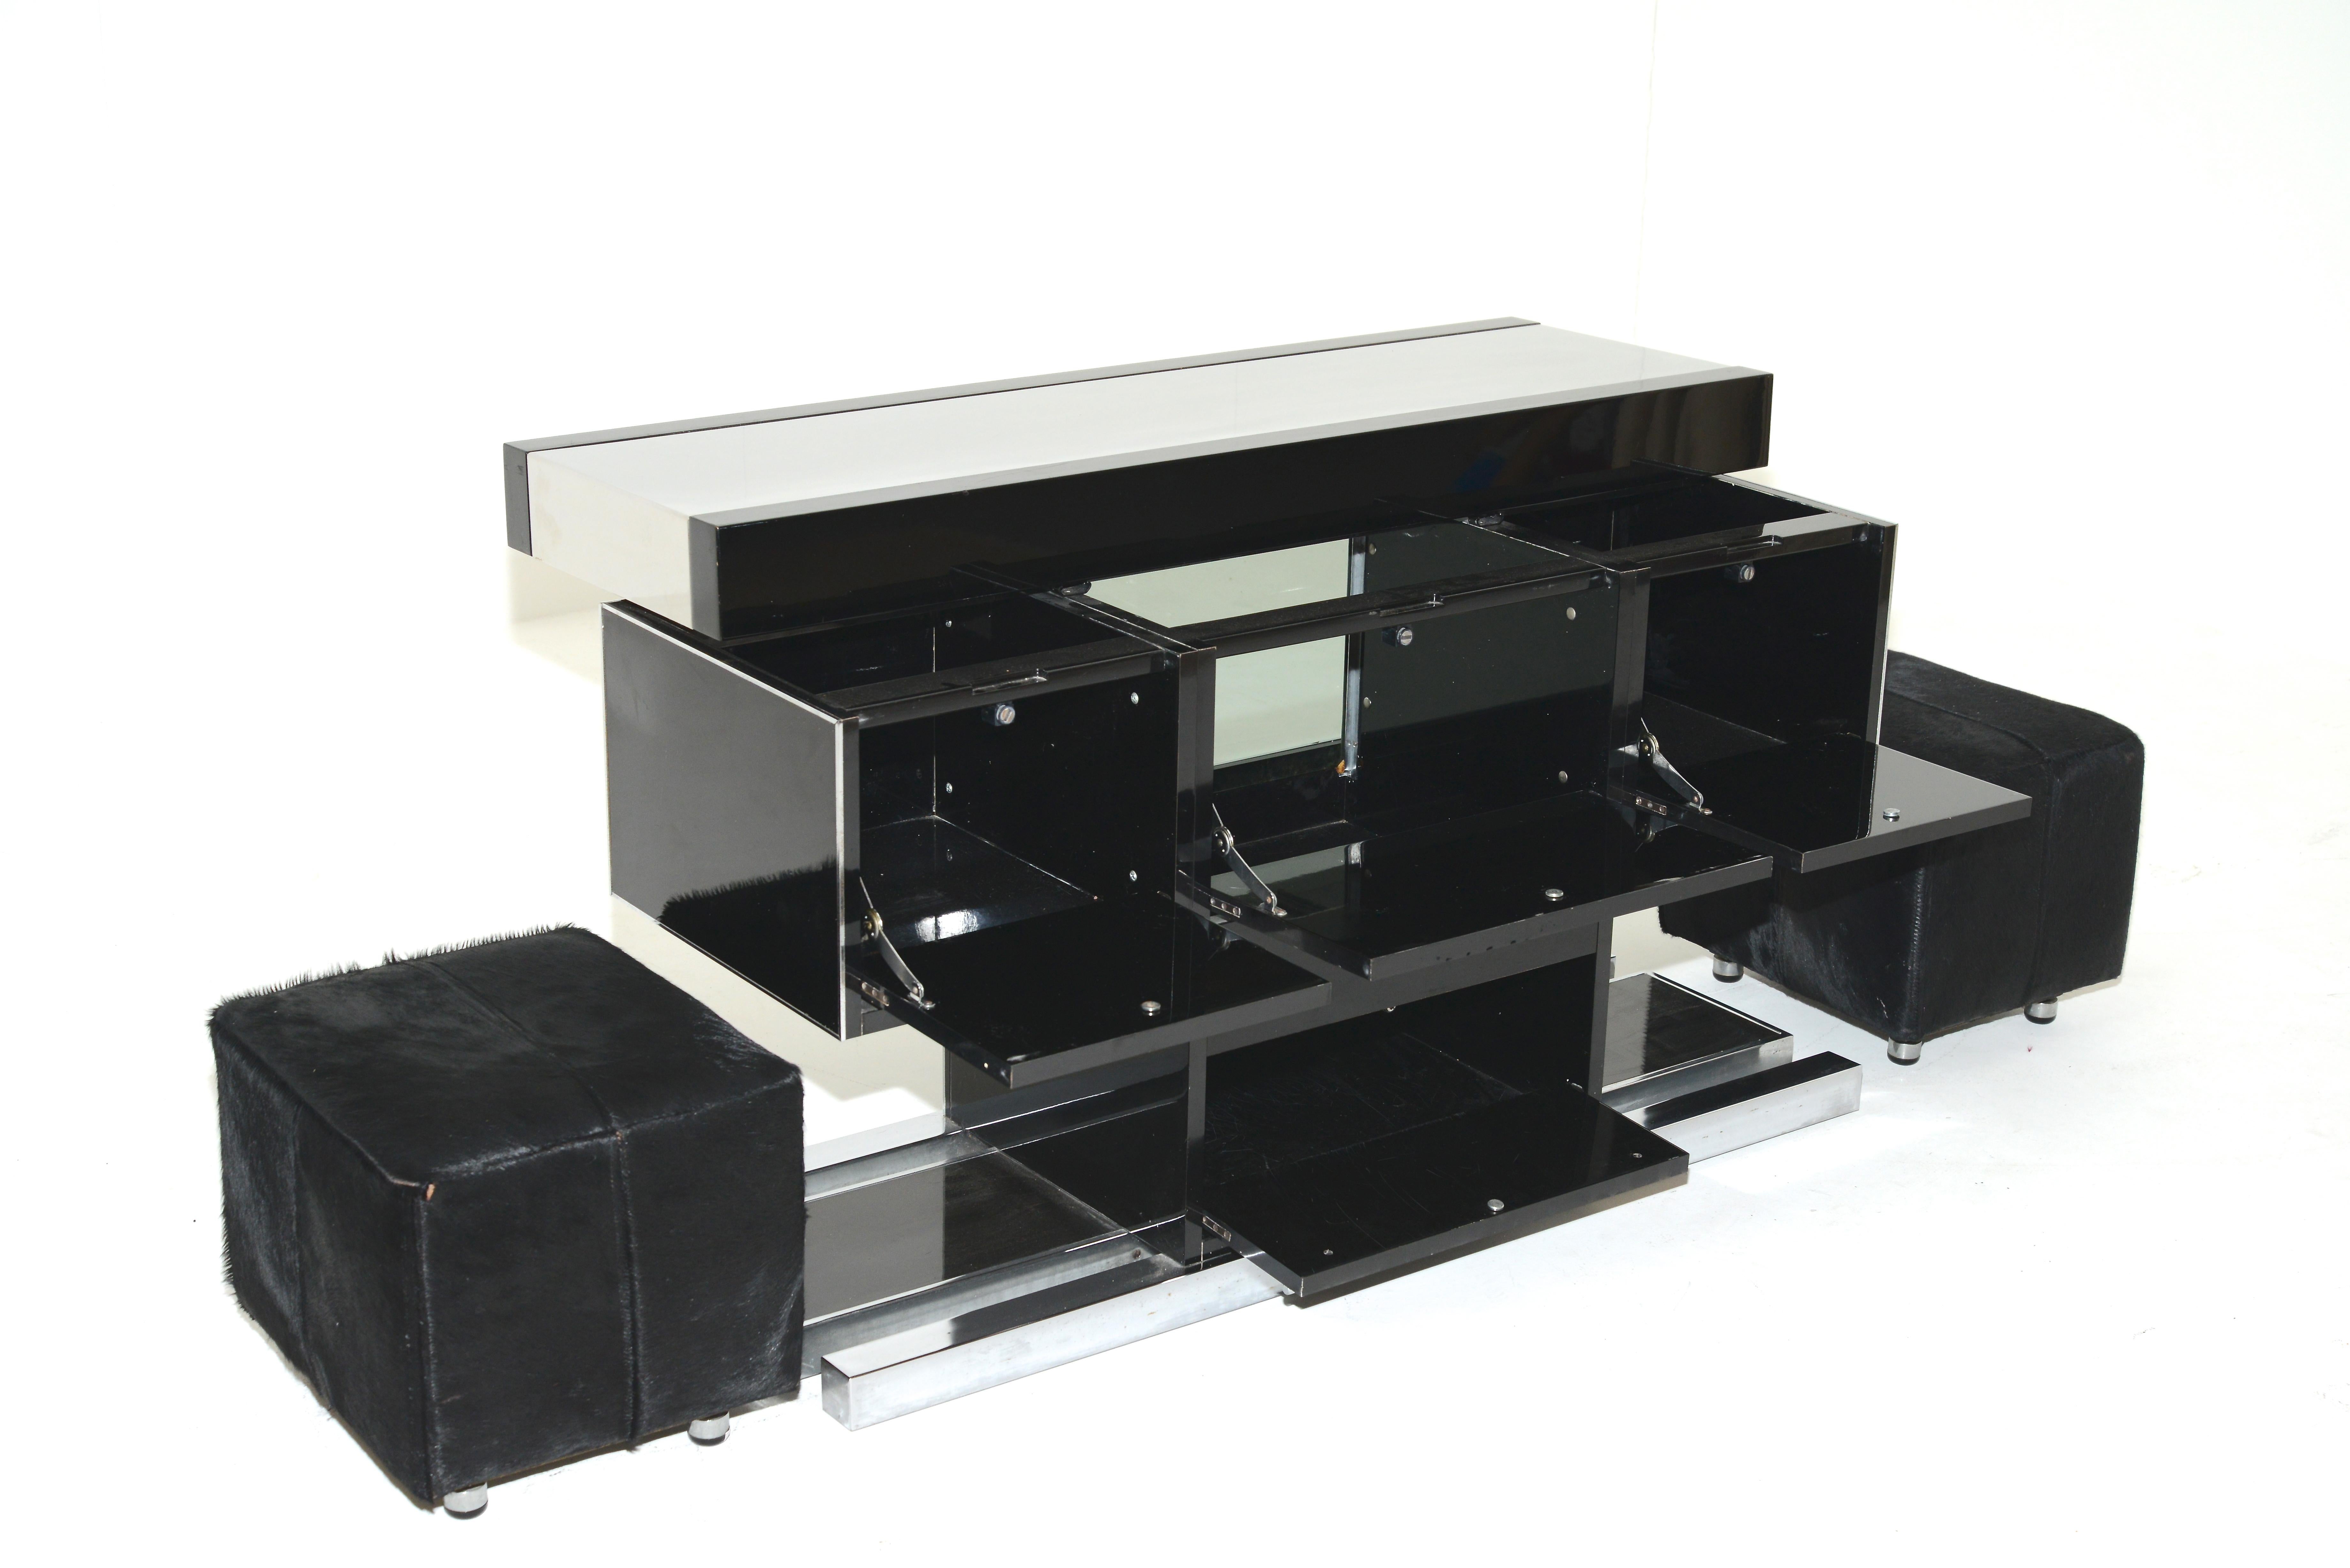 Mid-Century Modern Italian dry bar set in black lacquered wood, polished stainless steel and glass doors with extractable leather ottomans by Willy Rizzo. 1970s.
      